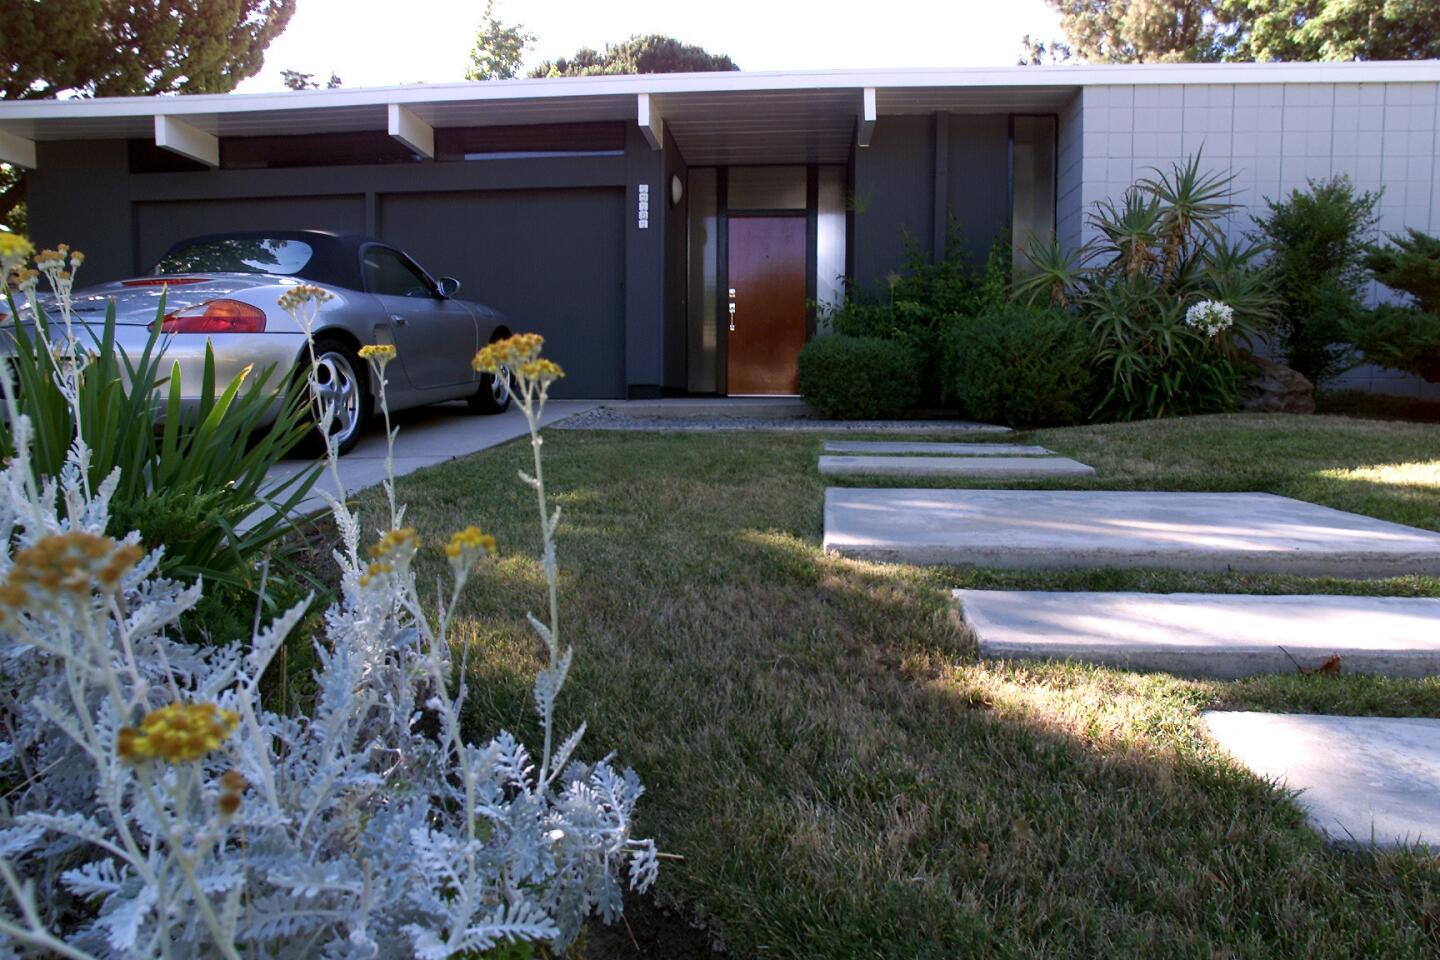 An Eichler home in the Balboa Highlands tract in Granada Hills.